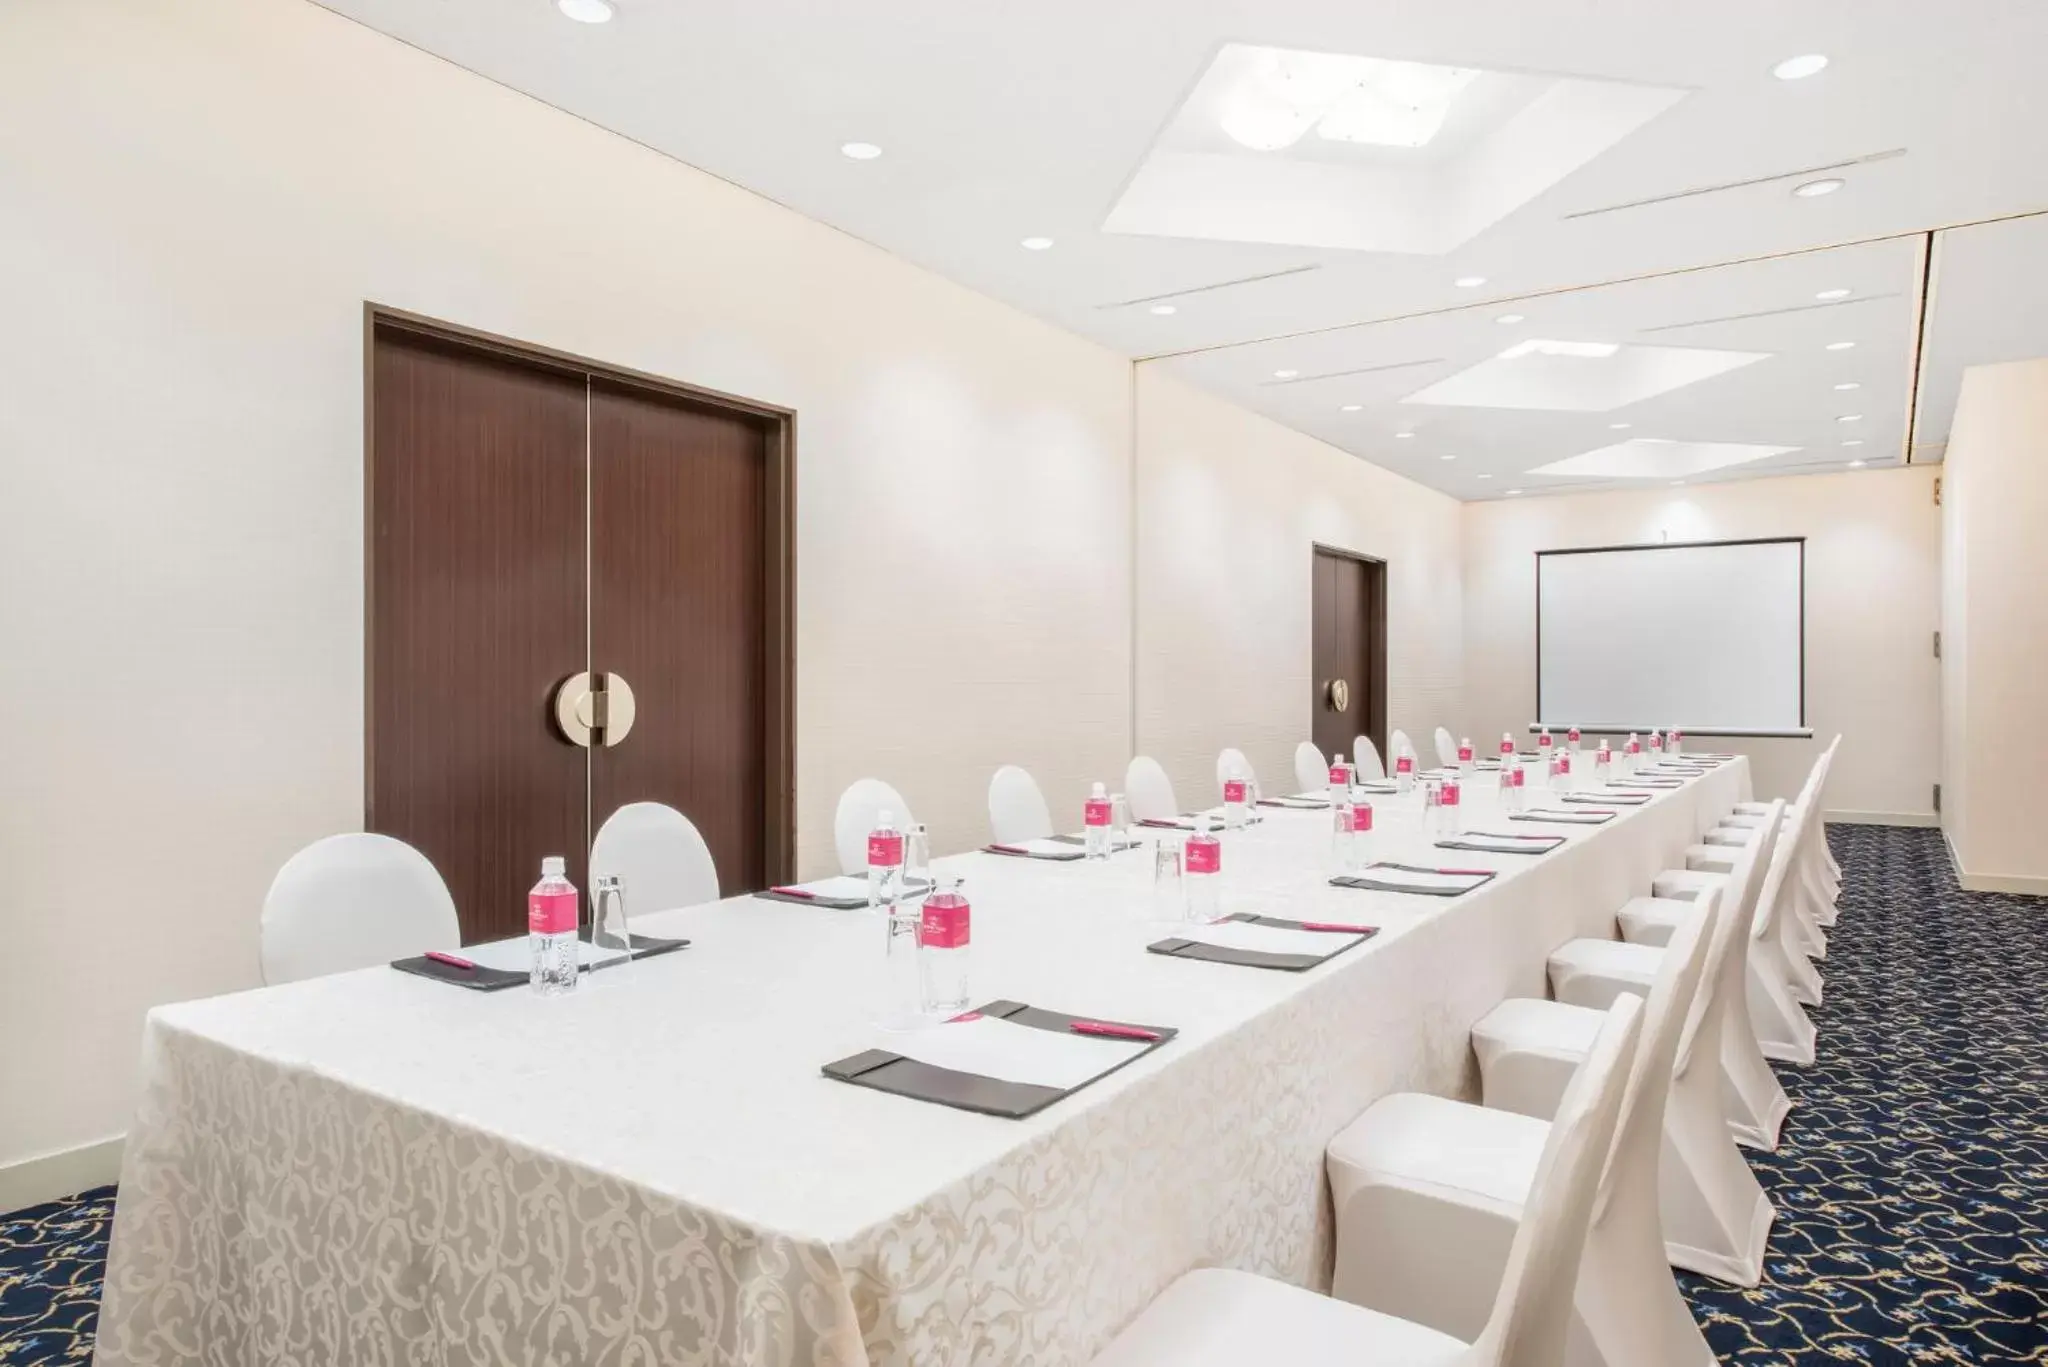 Meeting/conference room in ANA Crowne Plaza Narita, an IHG Hotel